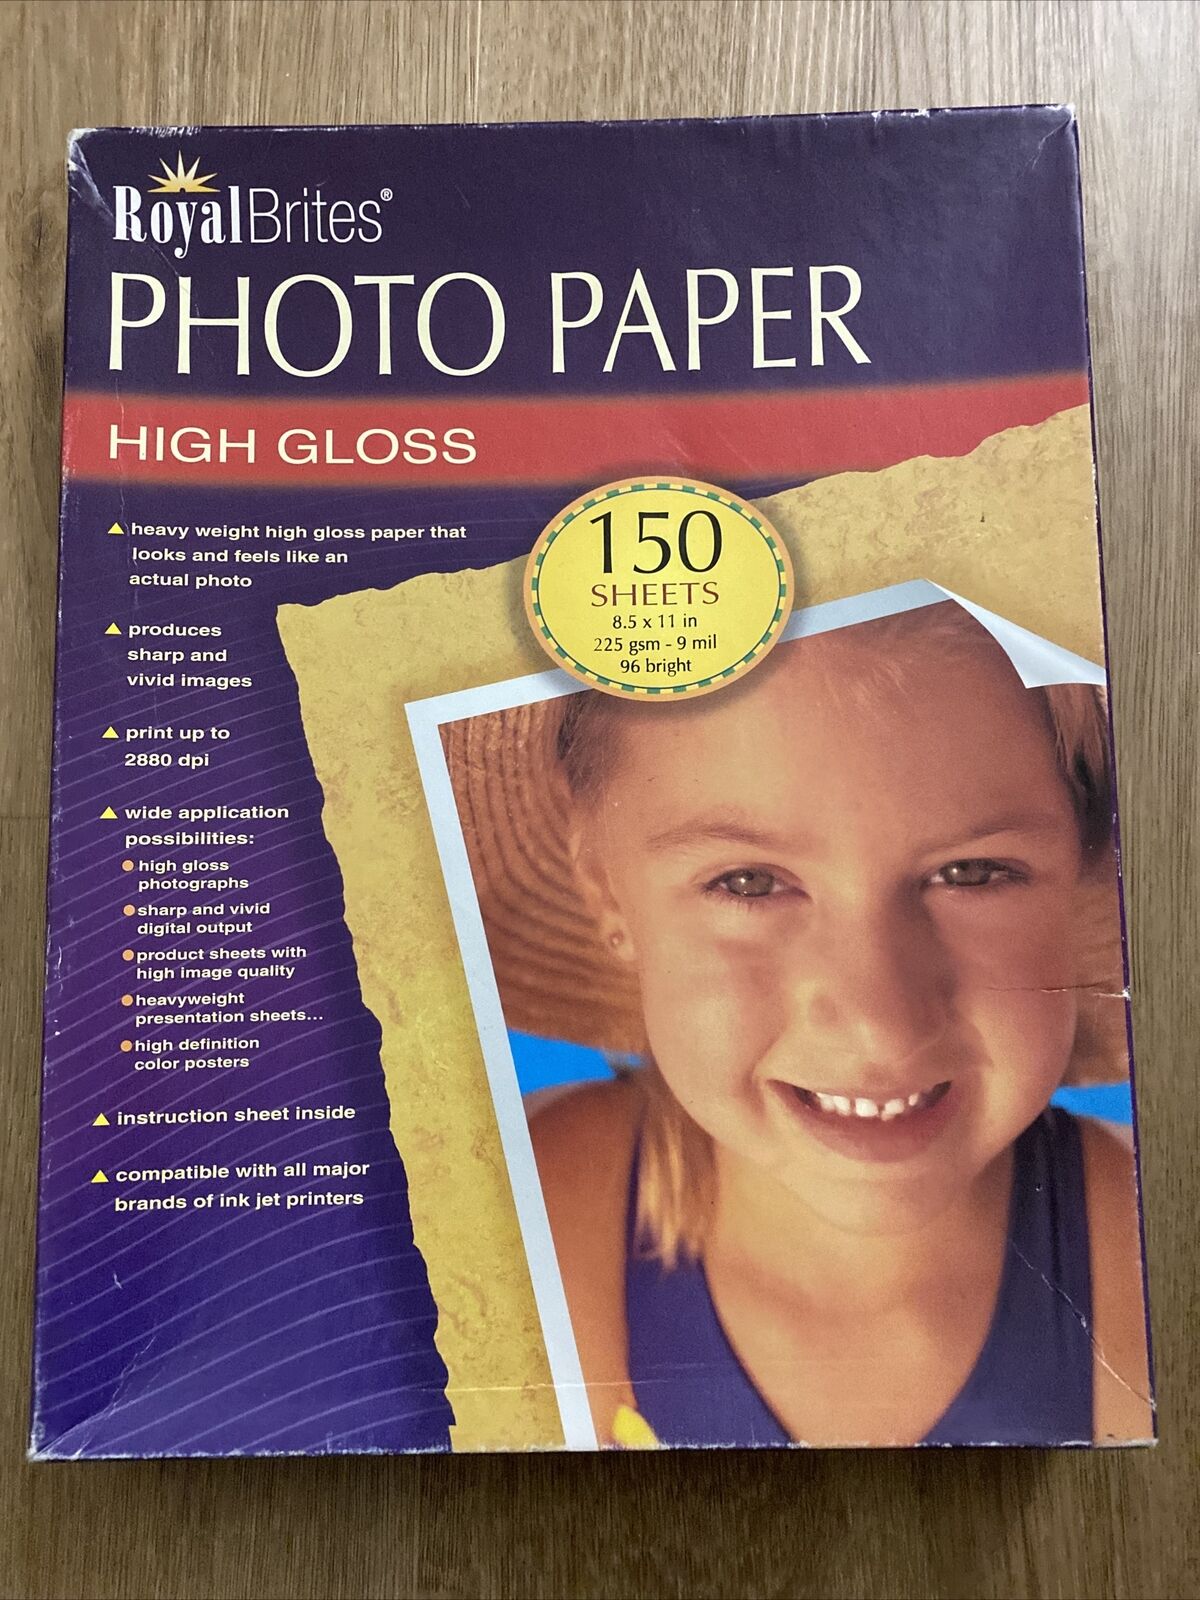 NEW Royal Brites Photo Paper High Gloss 150 Sheets , 8.5 × 11 in. 9 Mil